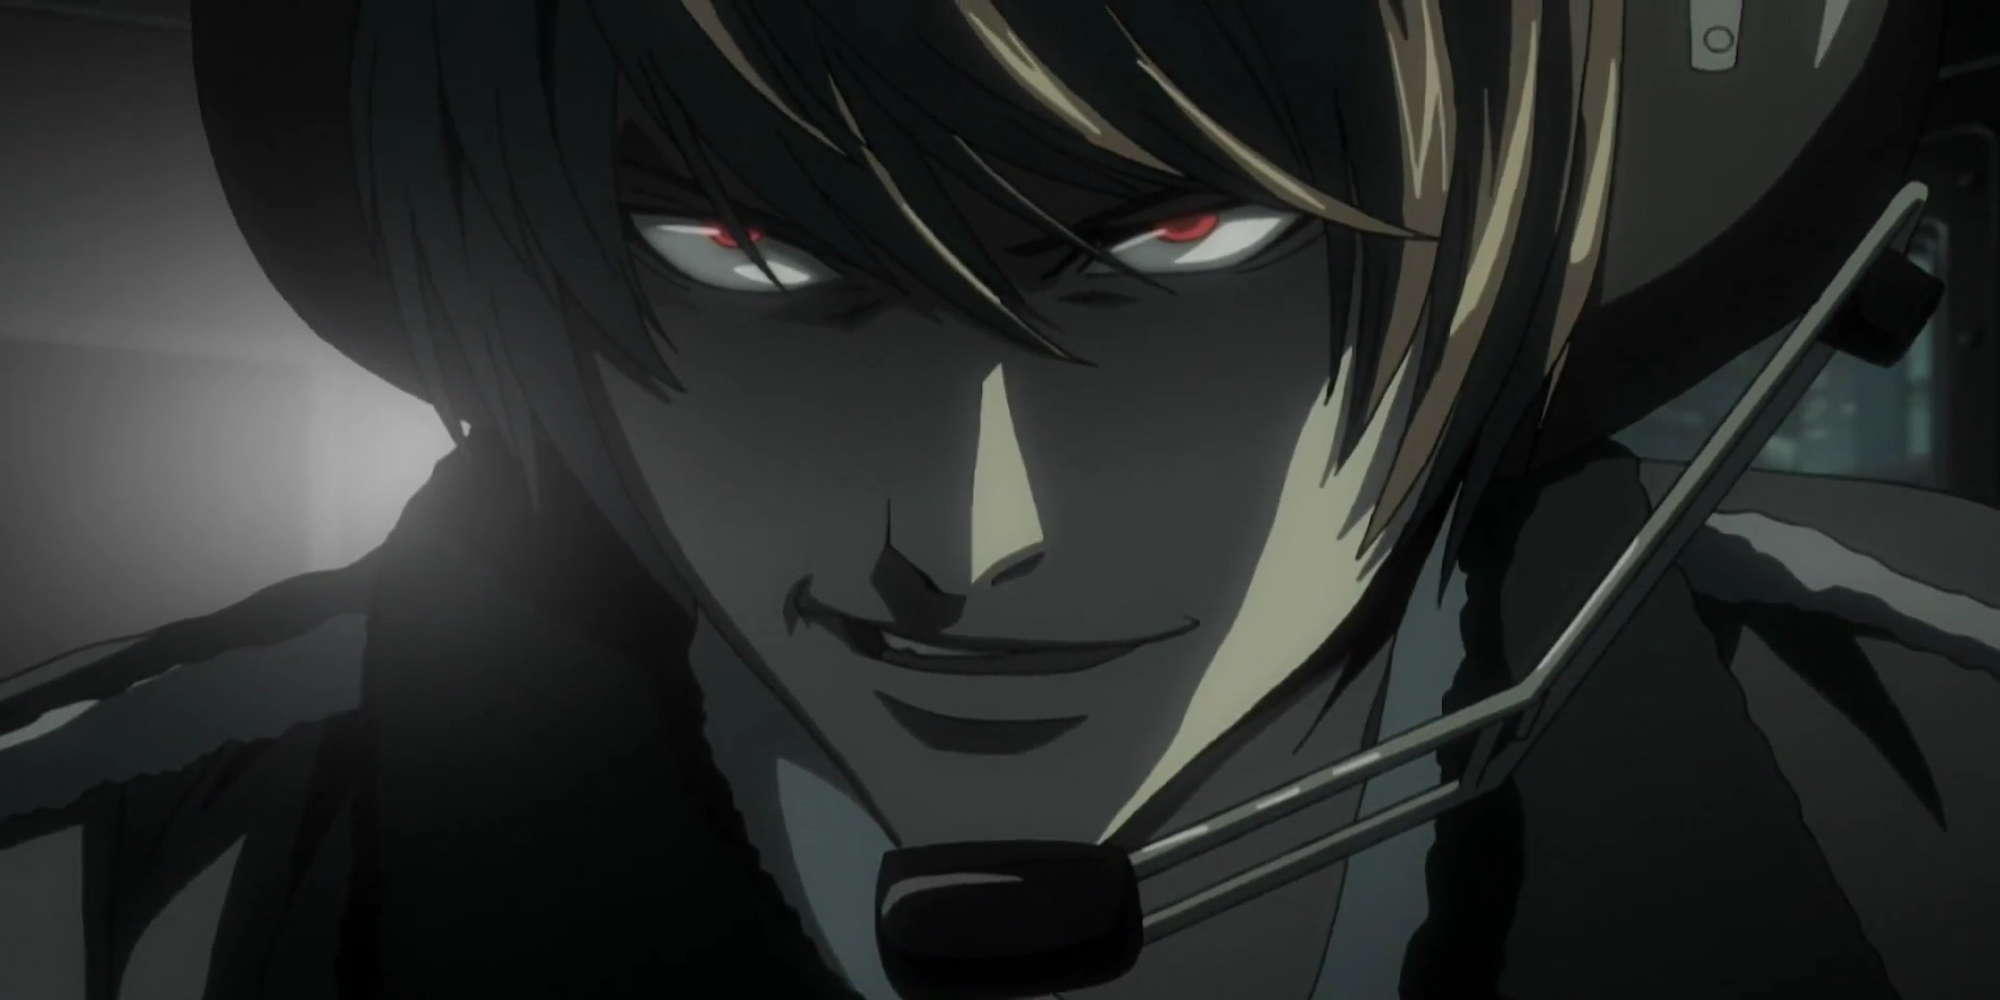 Light Yagami wearing a headset in a helicopter while regaining his memory in Death Note.